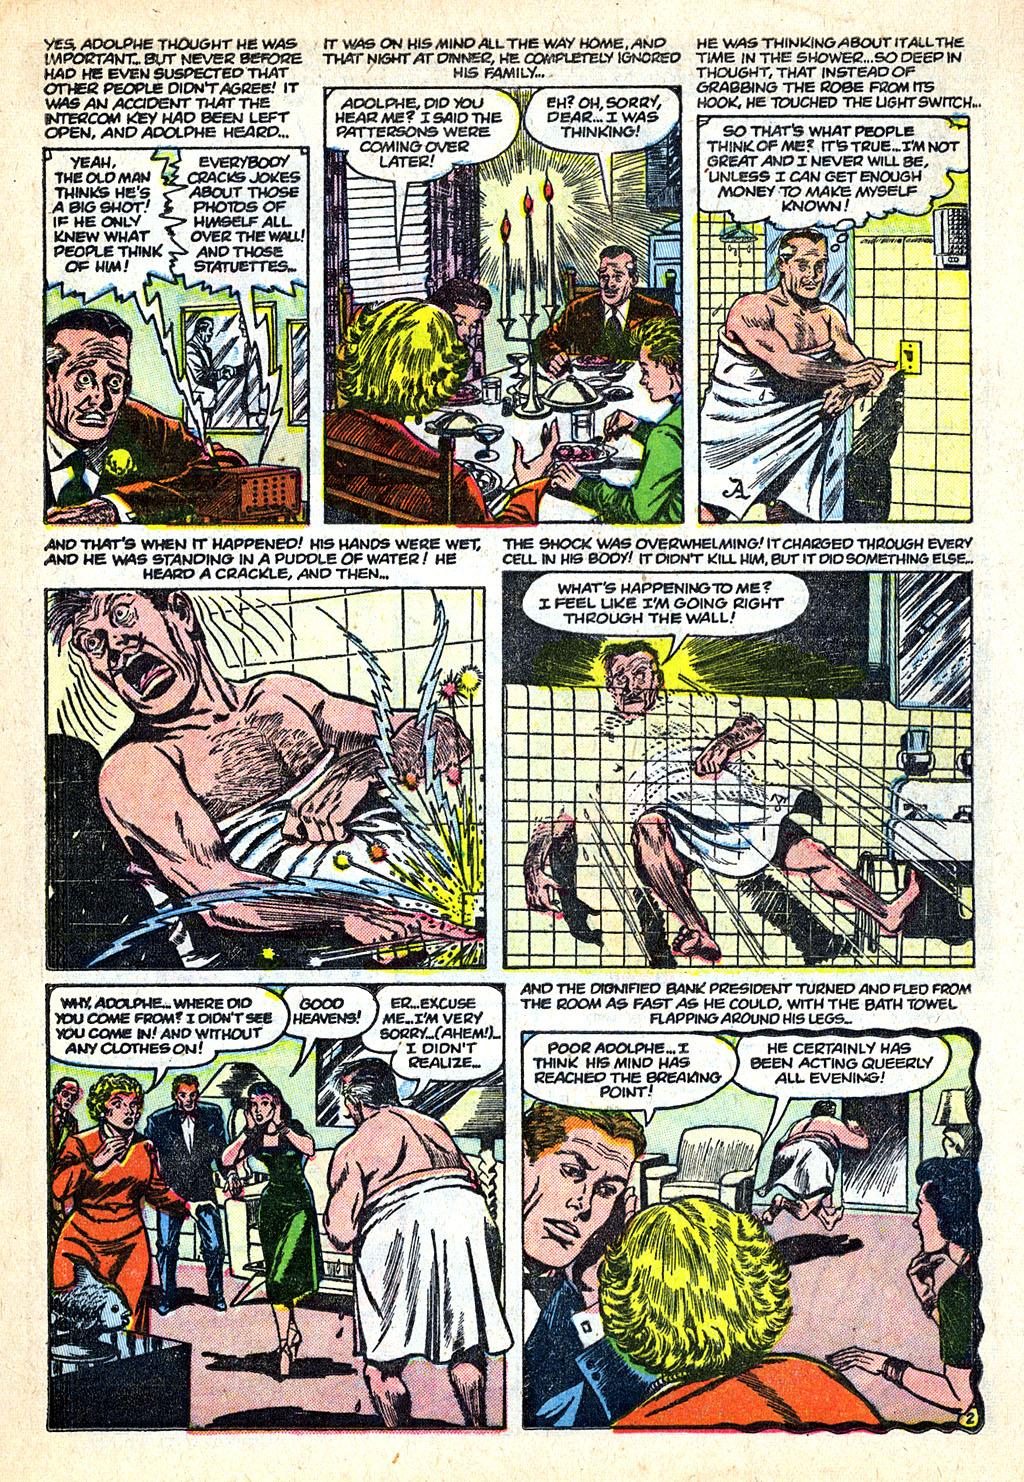 Marvel Tales (1949) 127 Page 16